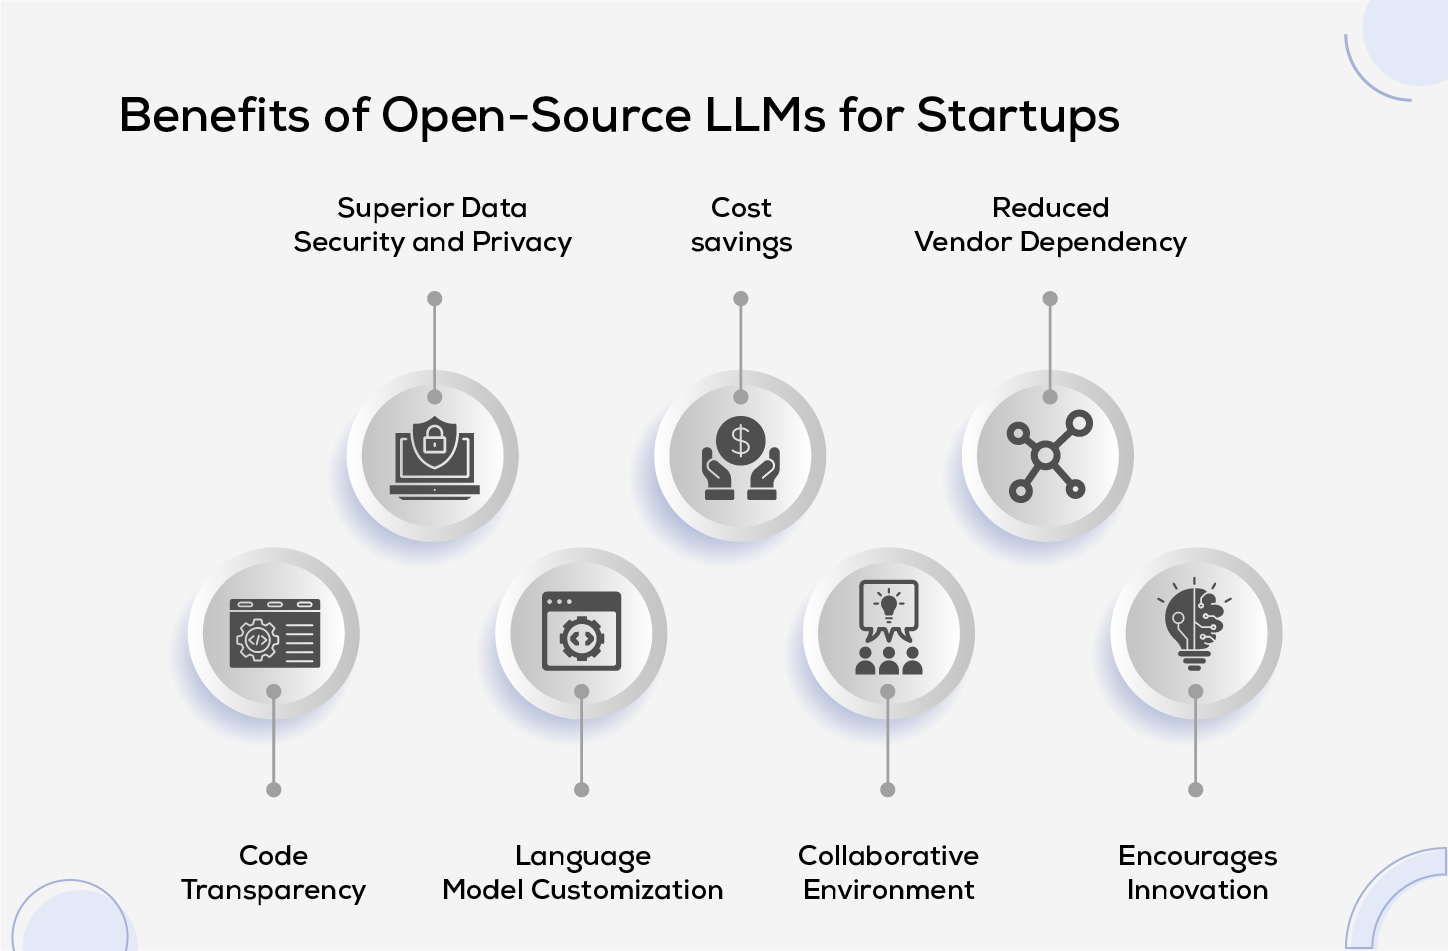 Benefits of Open-Source LLMs for Startups